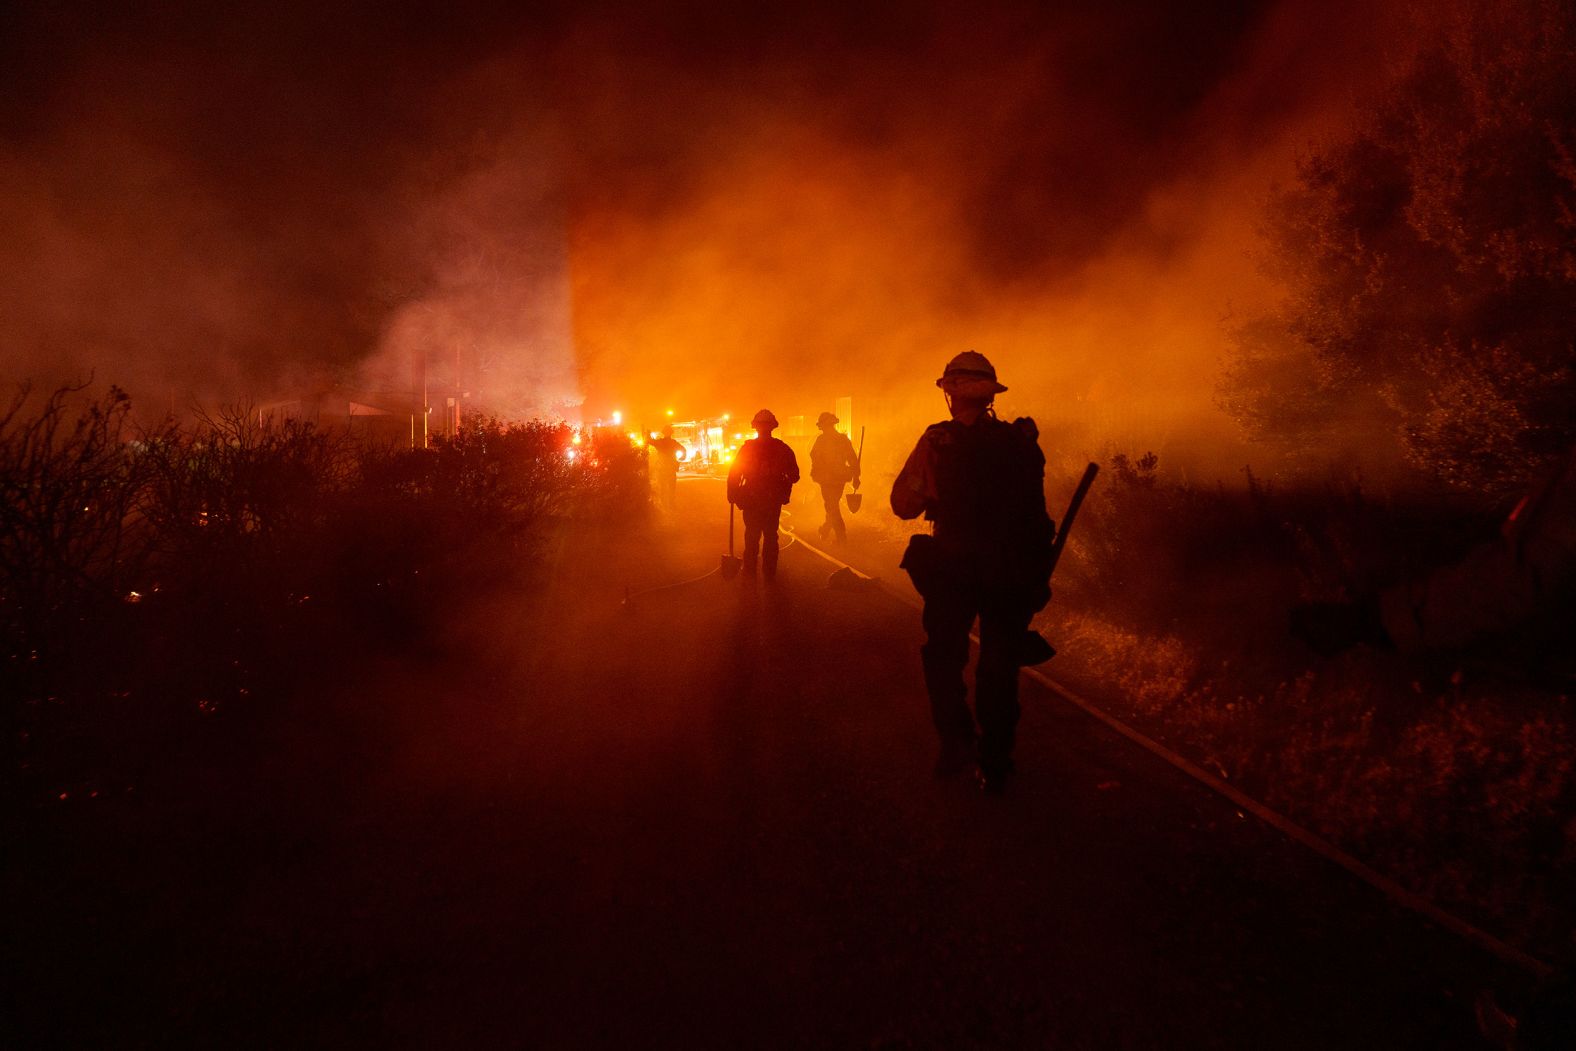 Firefighters work against the advancing Post Fire in Gorman, California, on Sunday, June 16. The wildfire <a href="https://www.cnn.com/2024/06/16/us/los-angeles-post-fire/index.html">forced the evacuations of hundreds of people from a state park</a>, authorities said, and it had <a href="https://www.fire.ca.gov/incidents/2024/6/15/post-fire" target="_blank">burned more than 15,000 acres</a> as of Thursday.